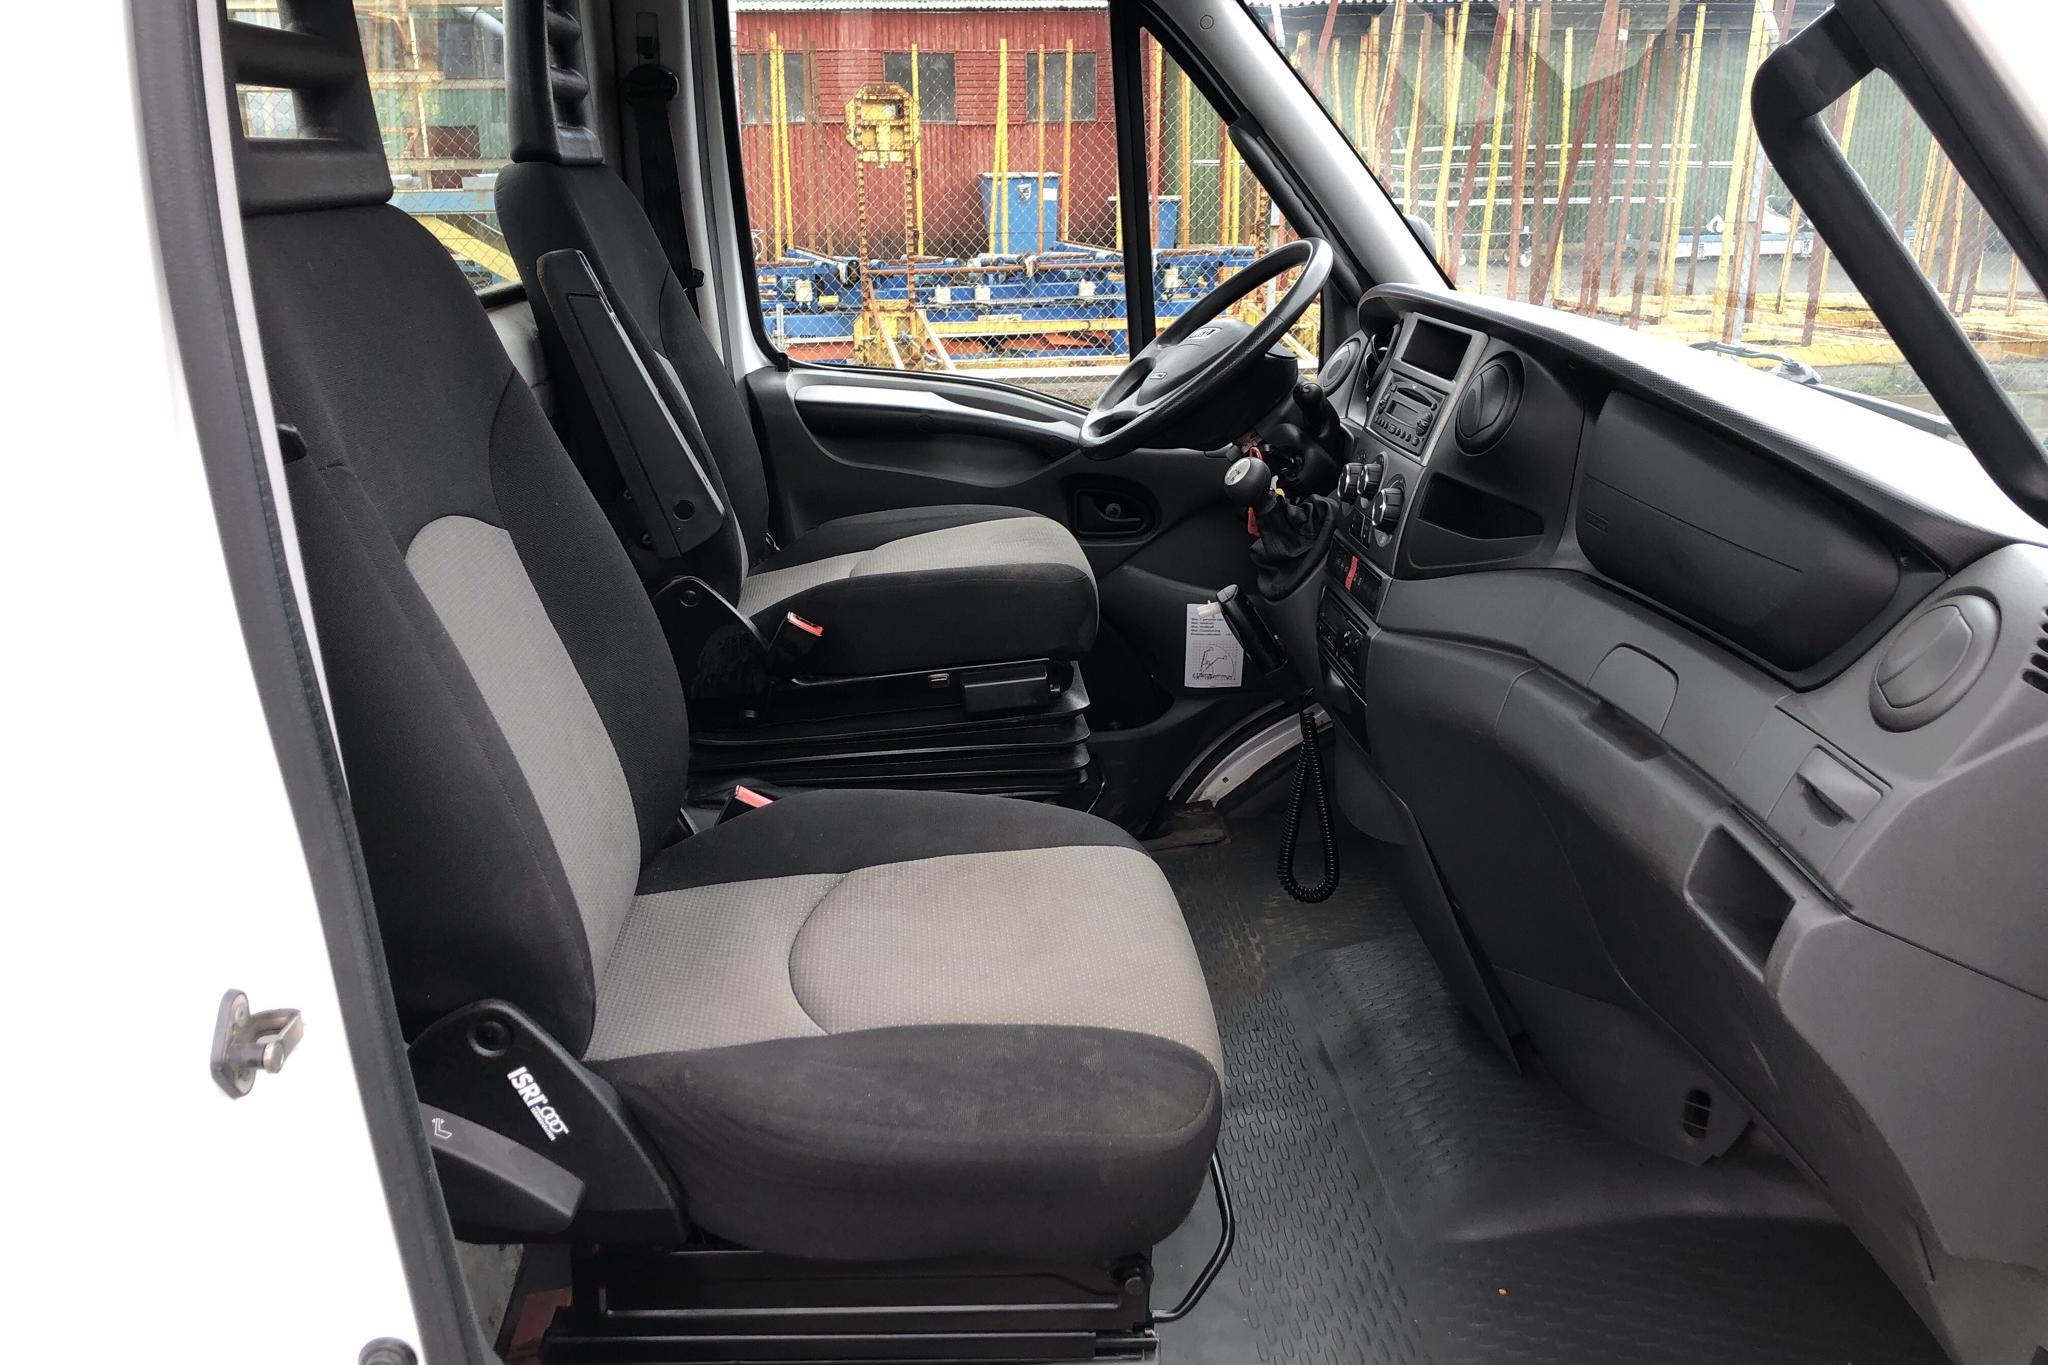 Iveco DAILY 70C - 0 km - Automatic - 2013